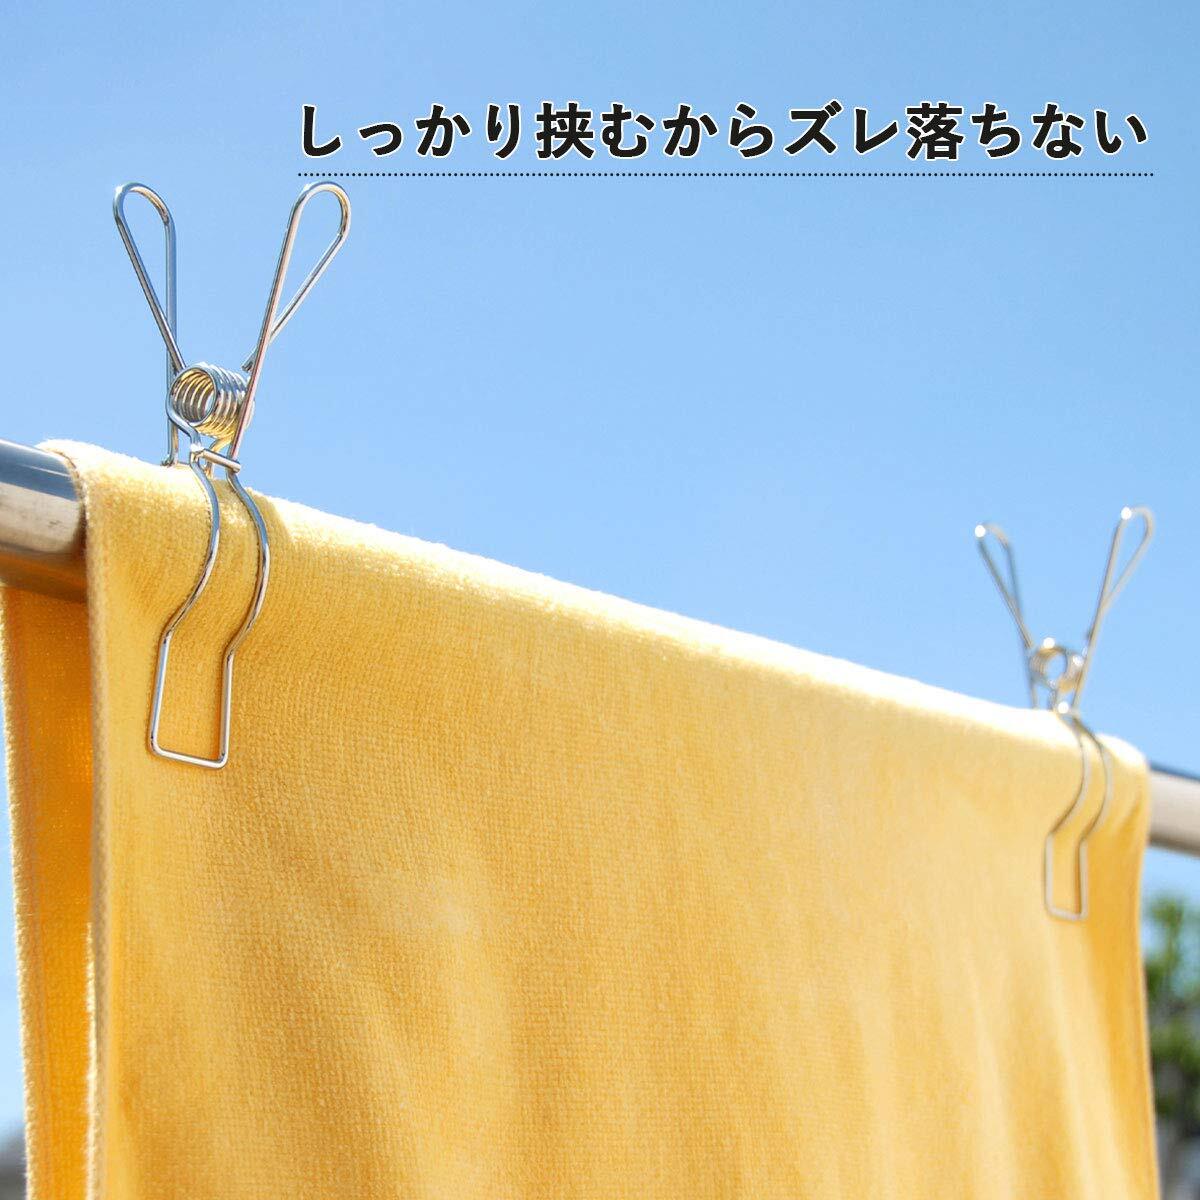  under ... laundry tongs rod clothespin stainless steel large stainless steel large part shop dried laundry clotheshorse 30899